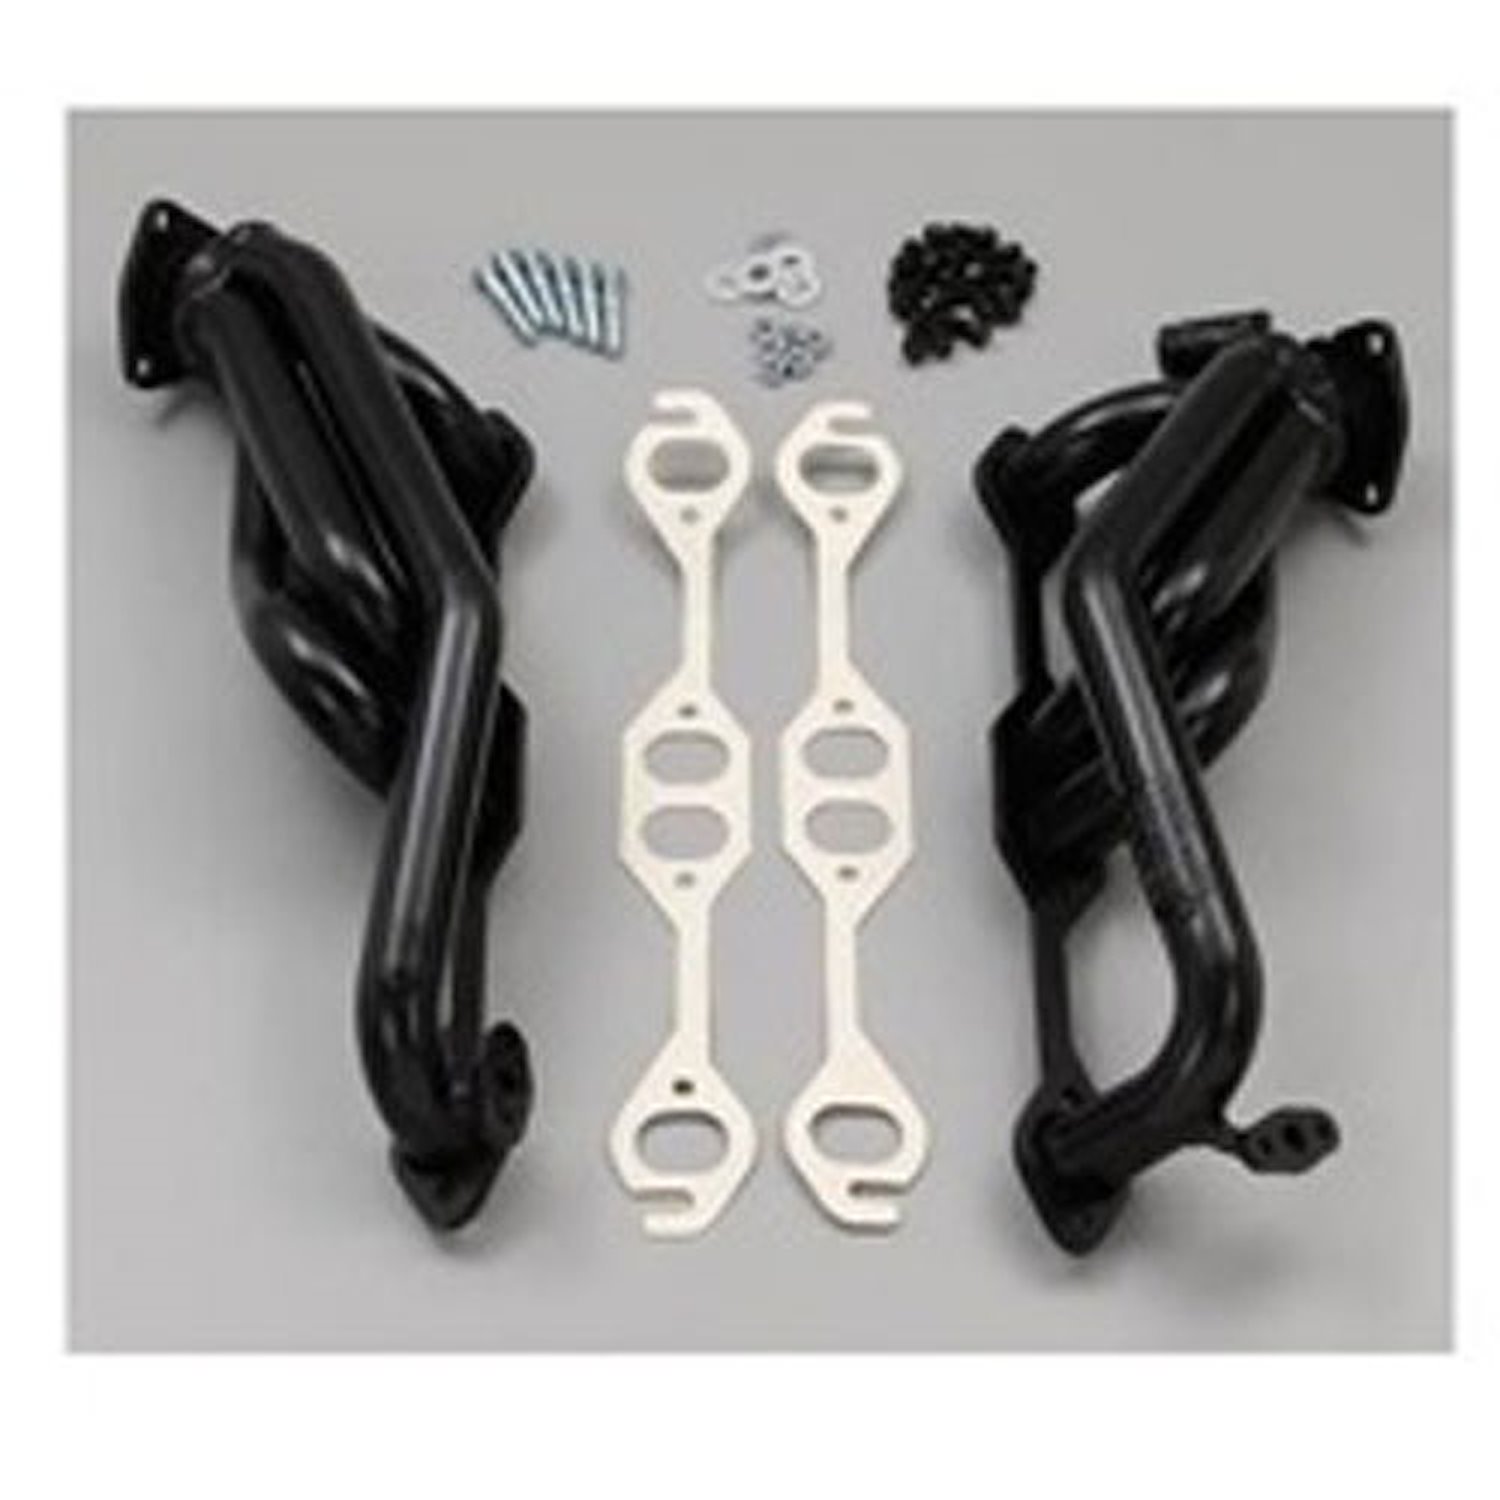 Standard Duty Uncoated Shorty Headers for 1996-2000 Chevy/GMC/Cadillac Truck/SUV 5.7L